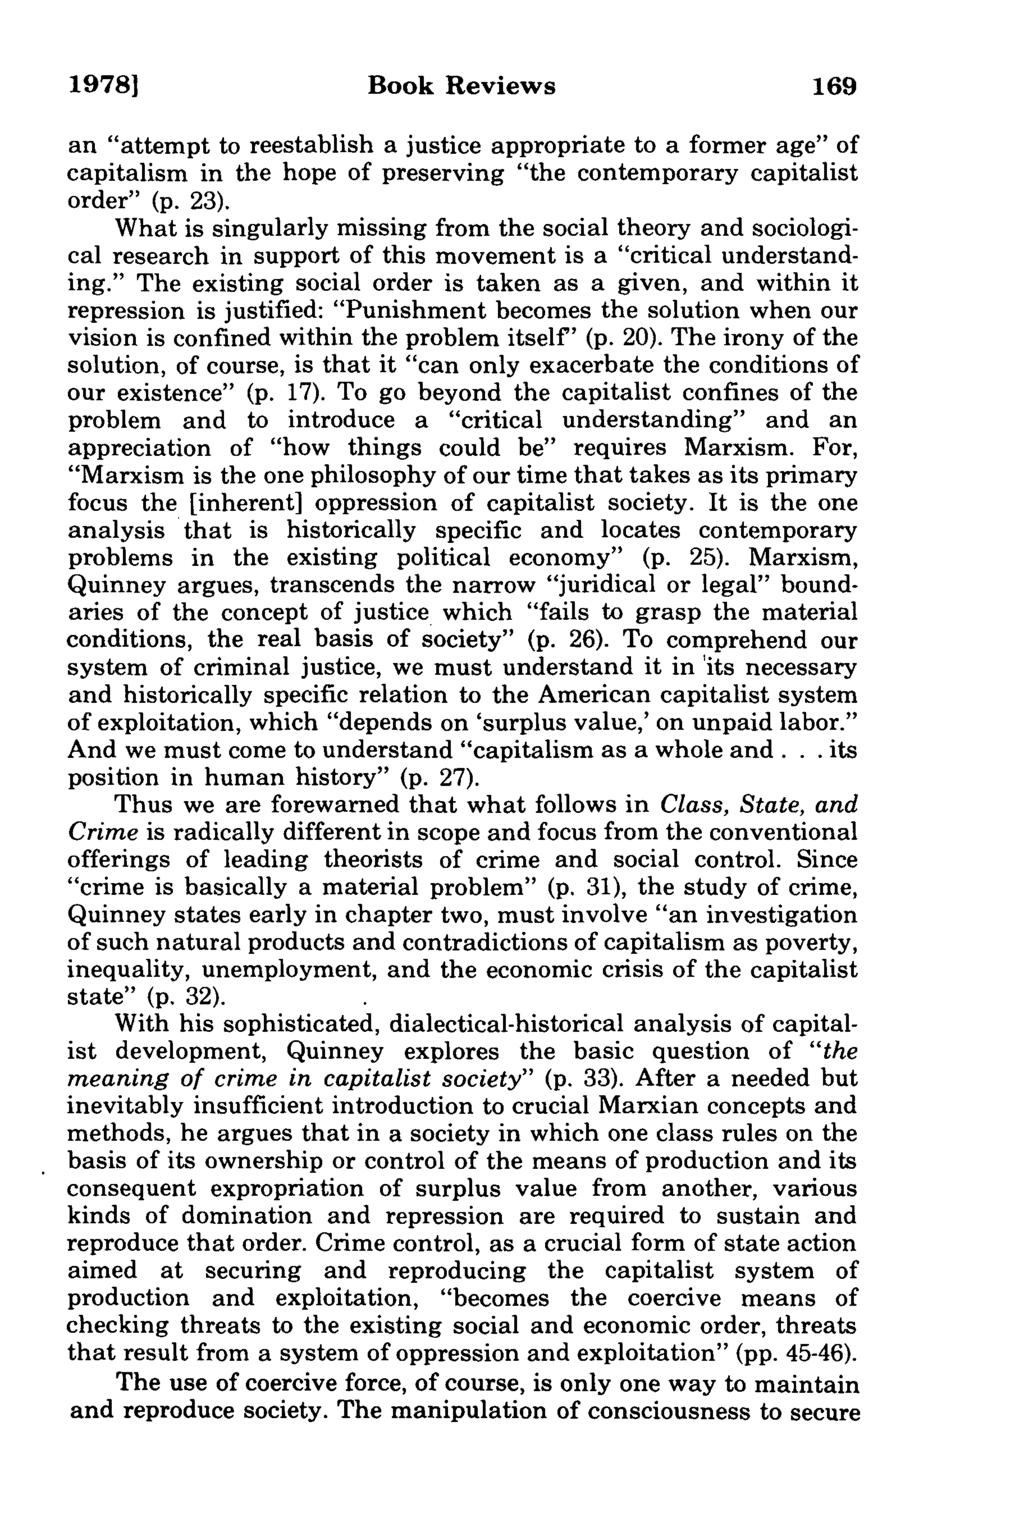 19781 Book Reviews 169 an "attempt to reestablish a justice appropriate to a former age" of capitalism in the hope of preserving "the contemporary capitalist order" (p. 23).